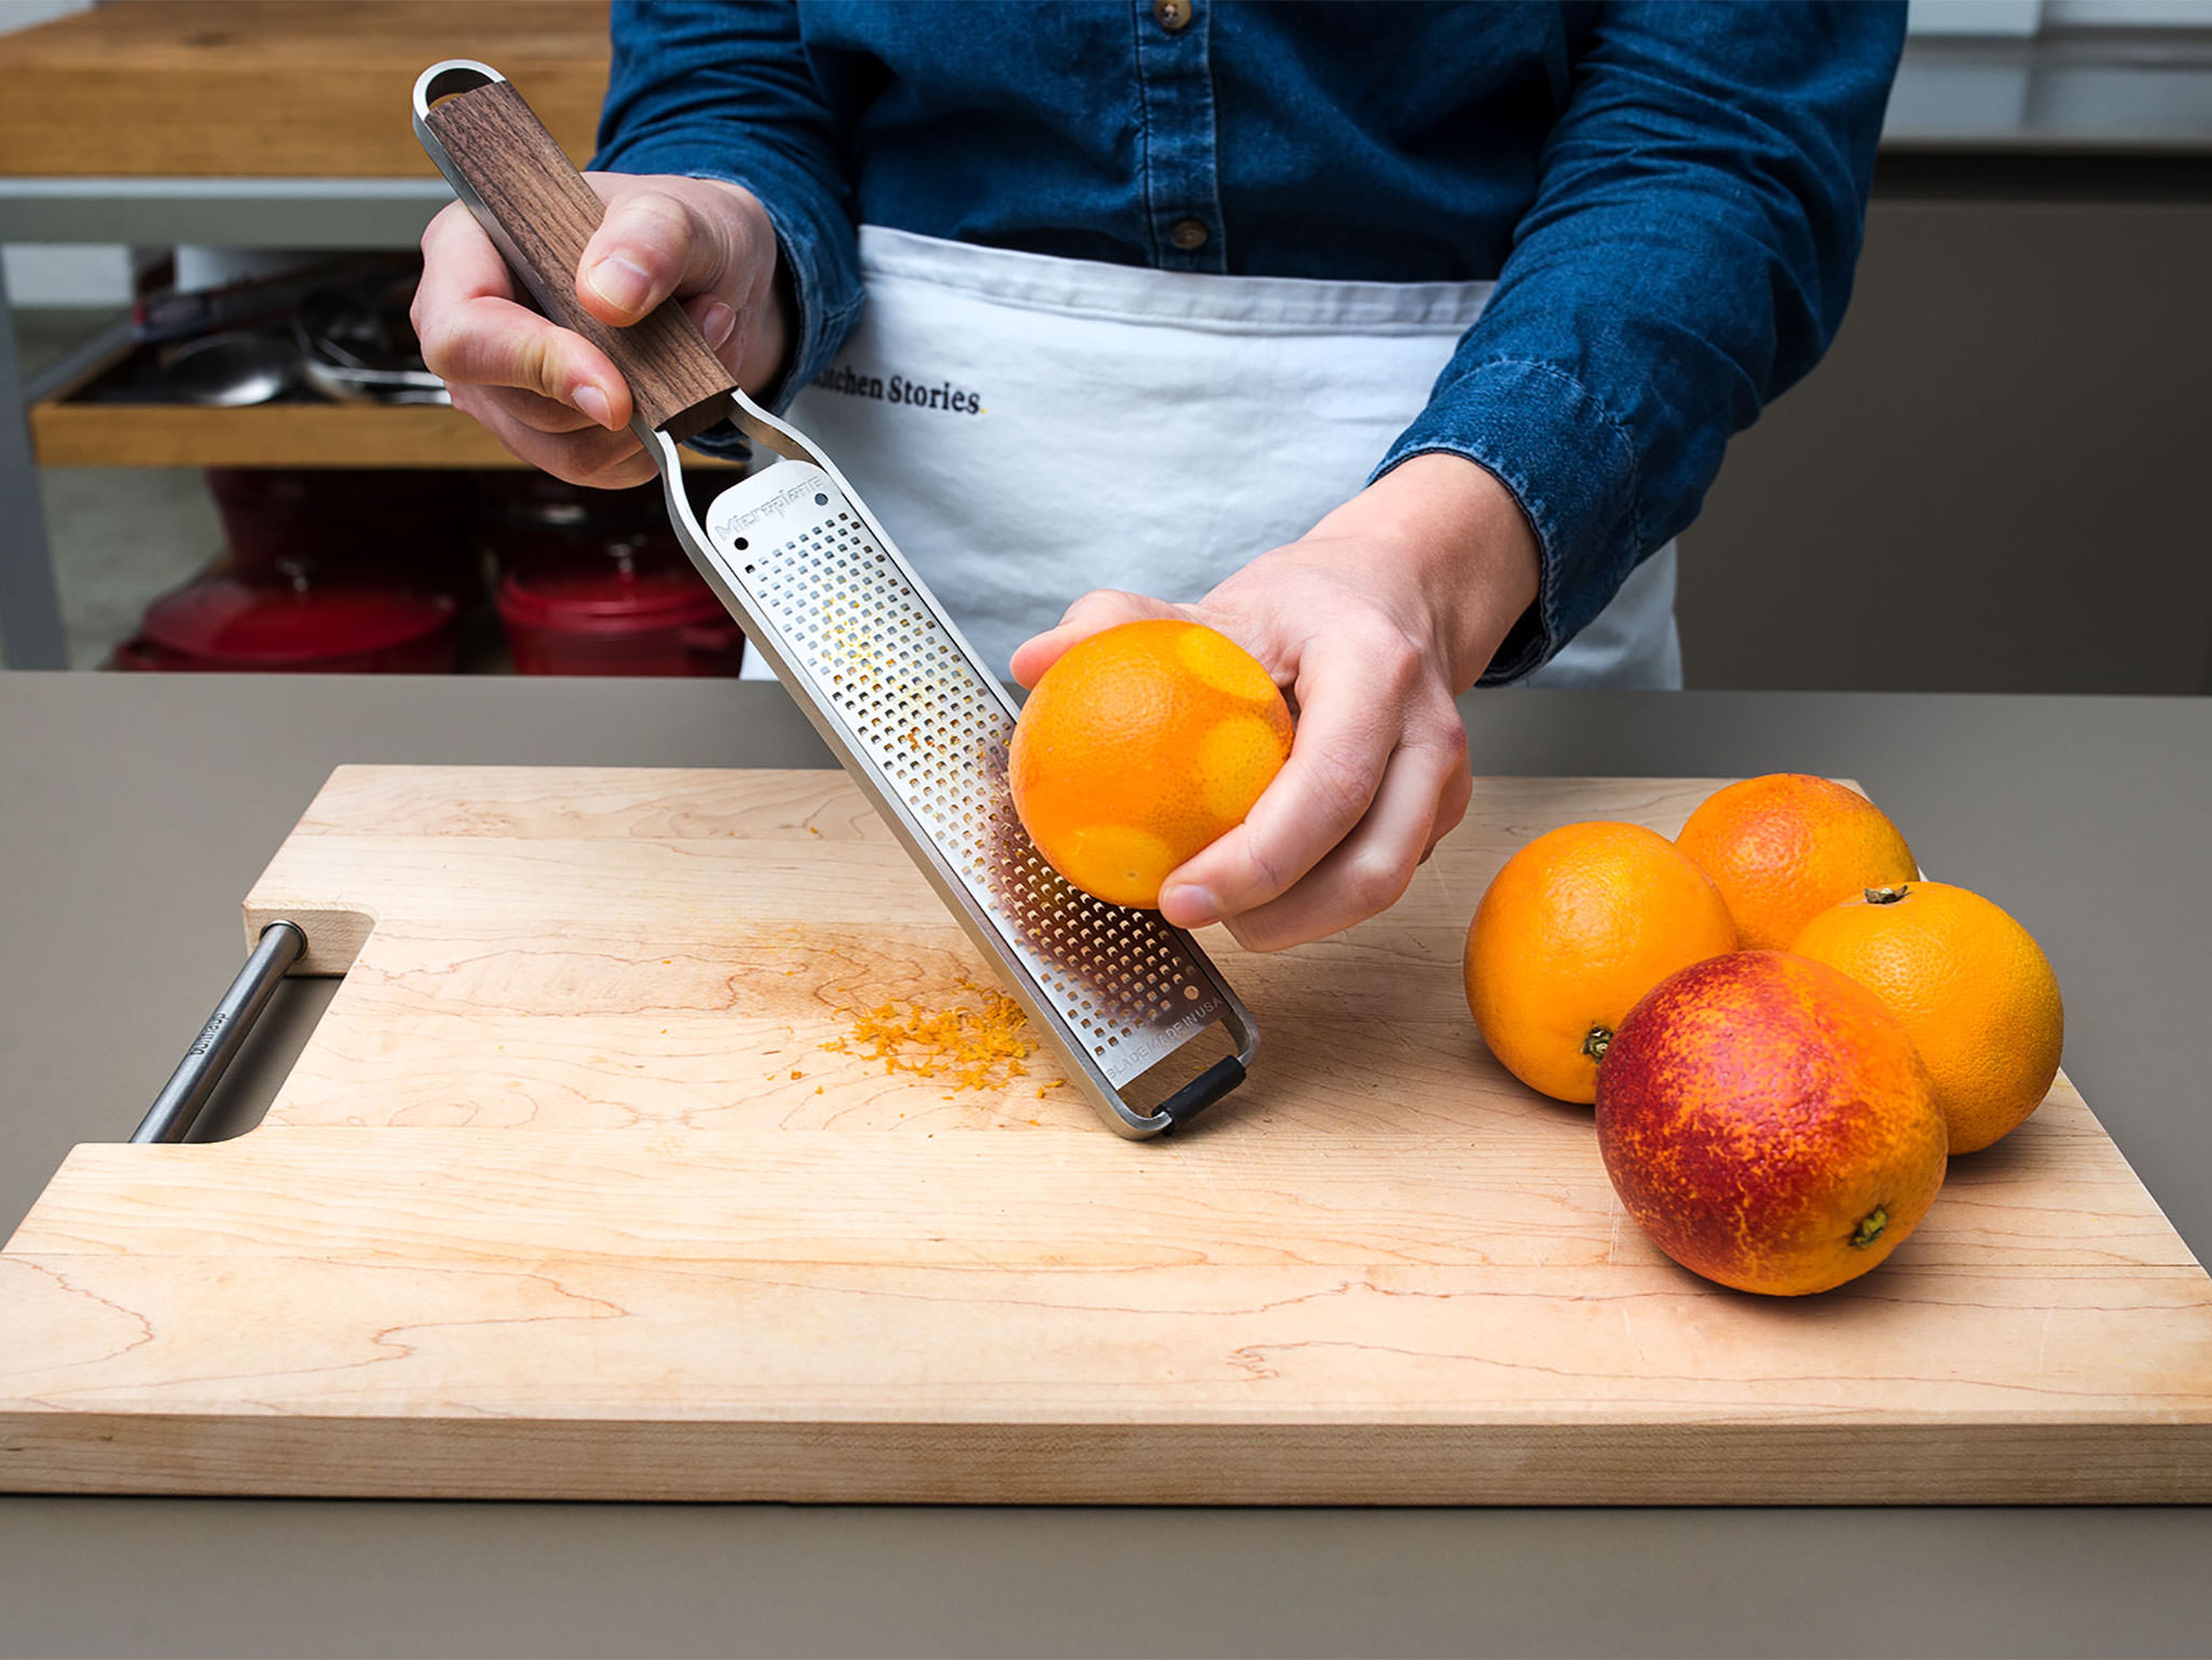 Pre-heat oven to 175°C/350°F. Rinse the blood oranges thoroughly with hot water and, using a fine grater, grate the zest of 1/5 of the oranges. Reserve zest. Cut off the top and bottom of the blood oranges and carefully removing the peel if you’d like. Slice the oranges thinly, removing any of the pithy core.